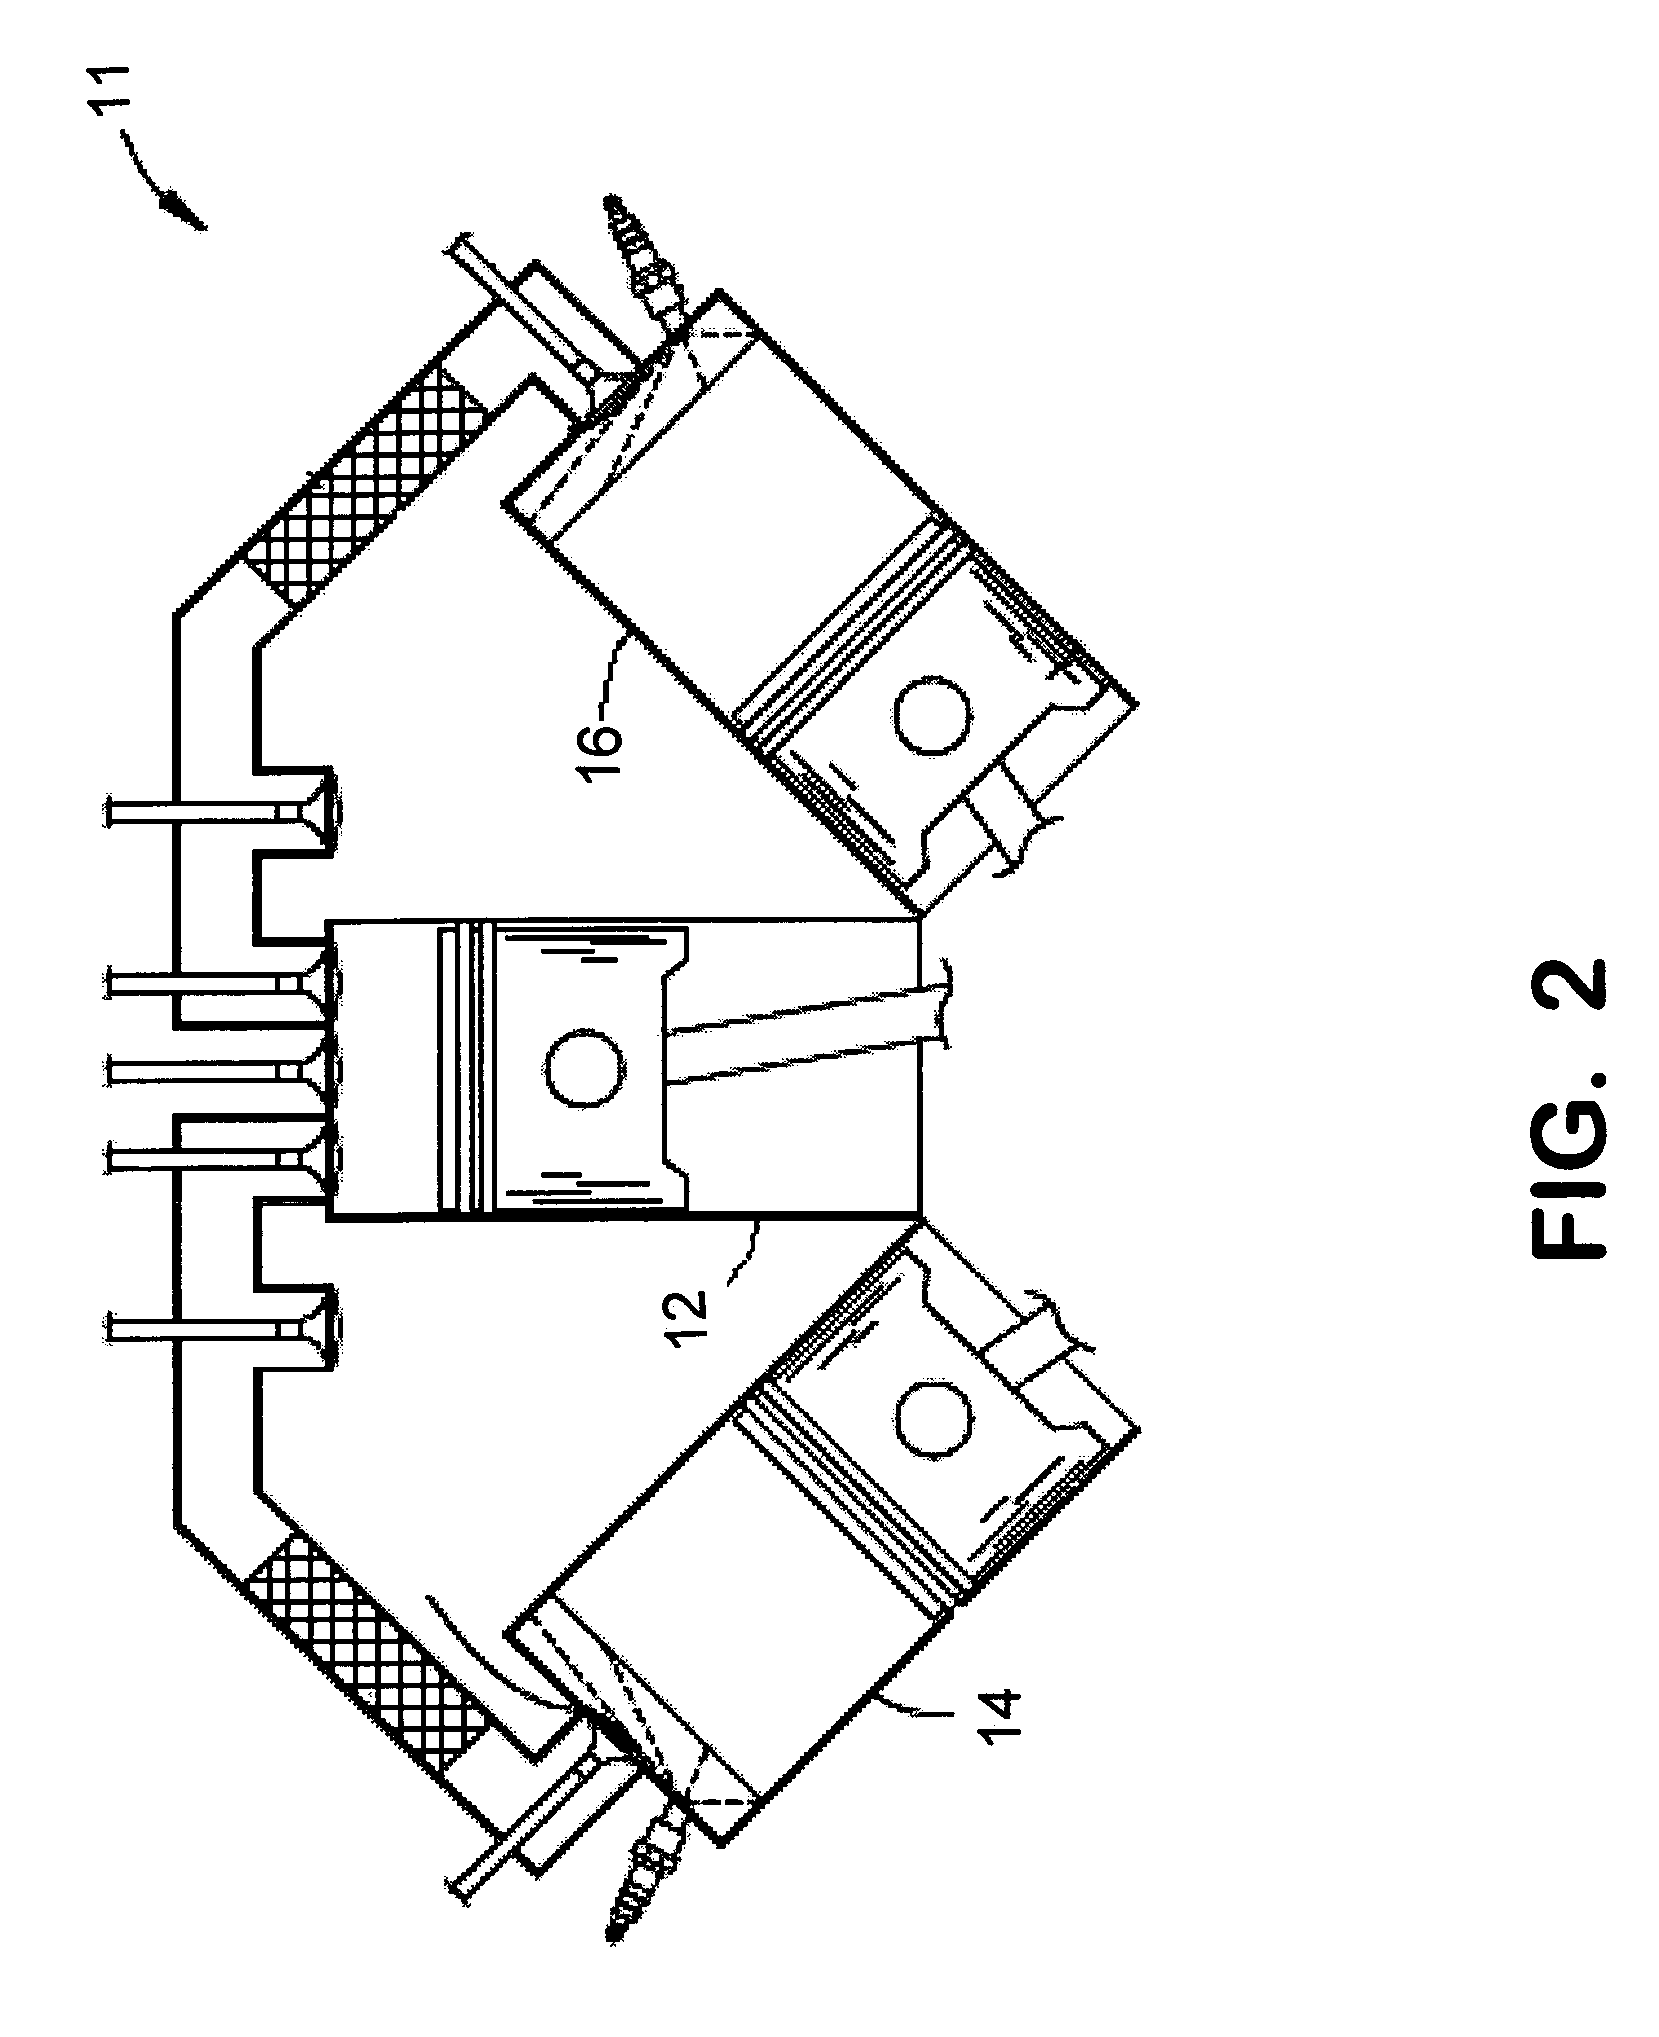 Thermal transfer internal combustion engine